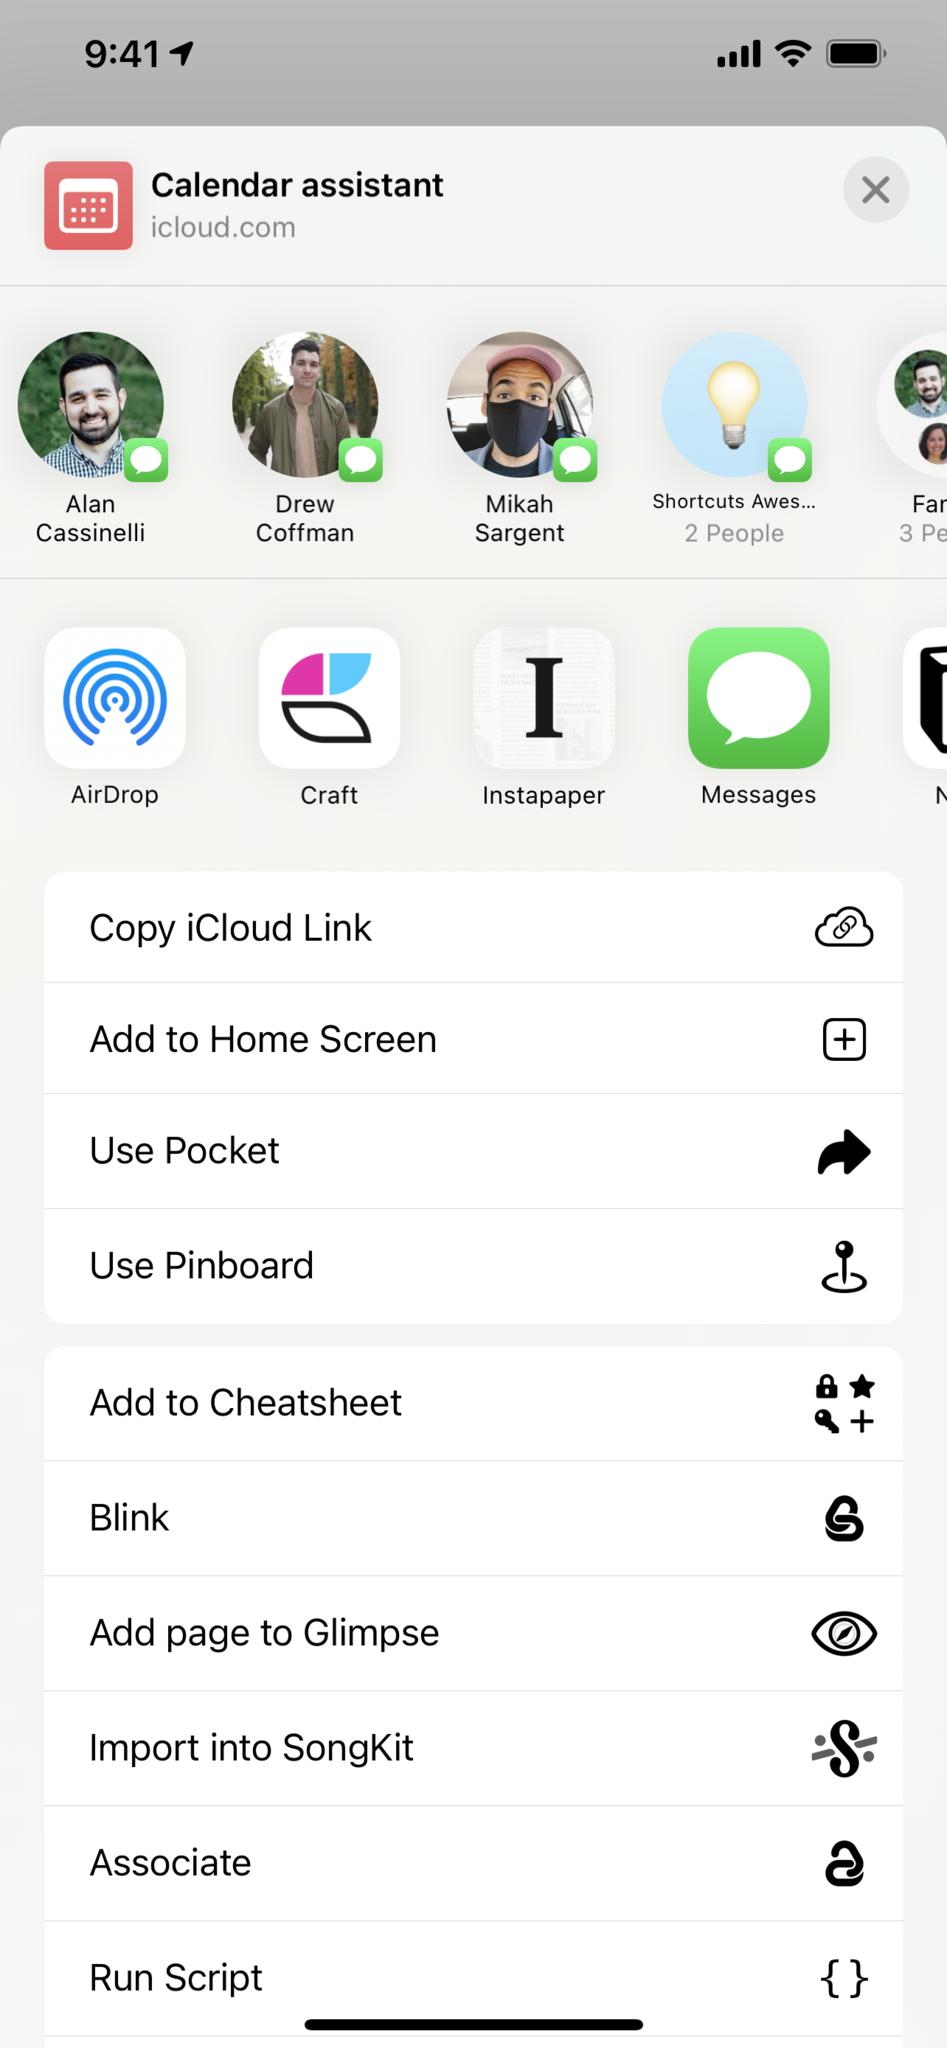 Screenshot showing the Share sheet for the example shortcut, with Copy iCloud Link available the first option.